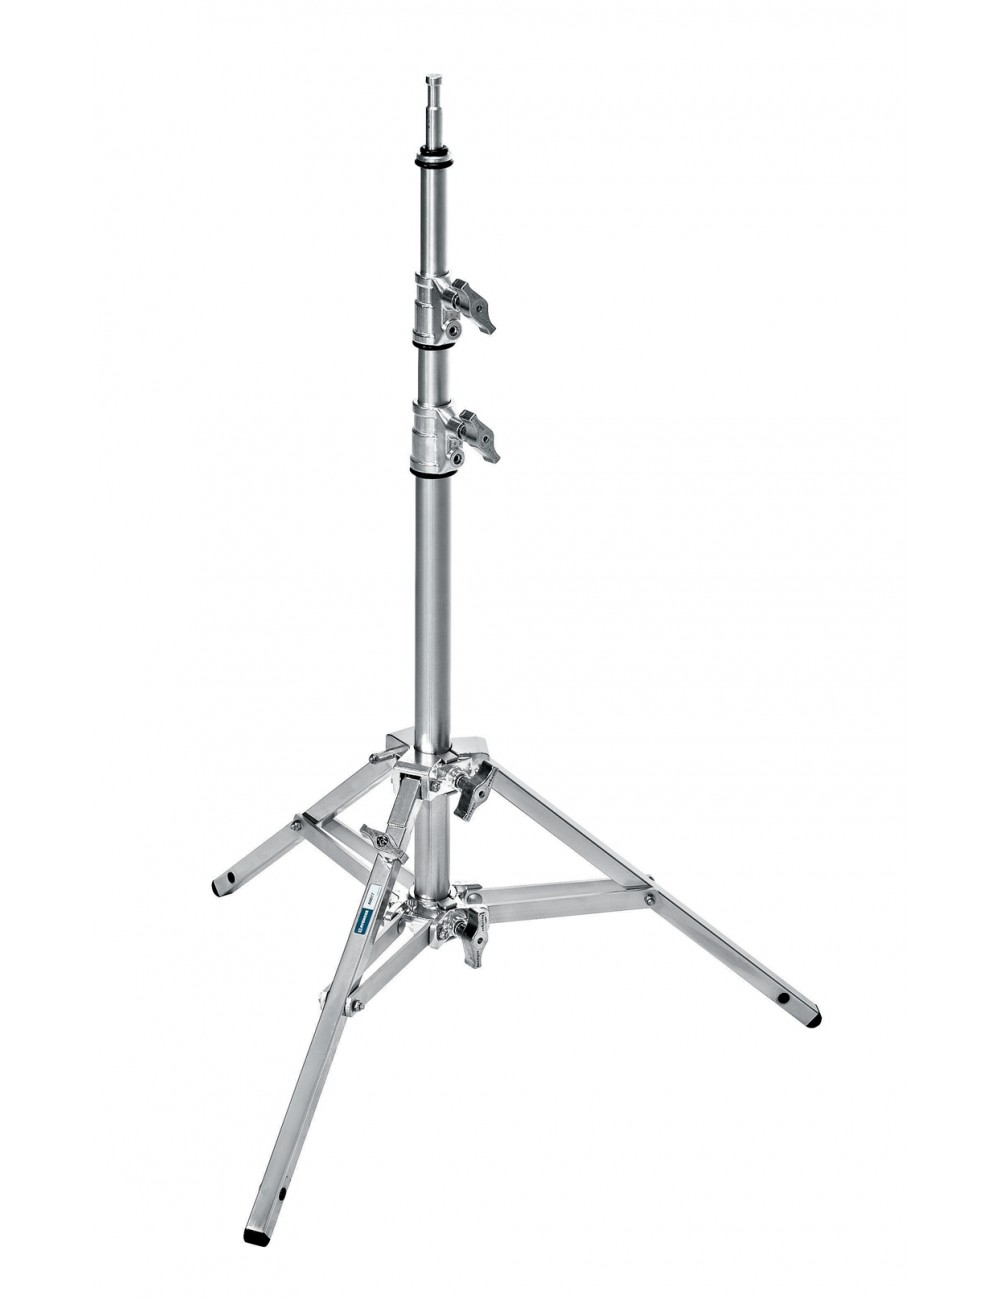 Baby Stand 17 Steel Base Alu Risers Sil 170 cm/35 in Avenger - 
Belastbarkeit: 4 kg/8.8 lbs., Maximale Höhe: 175